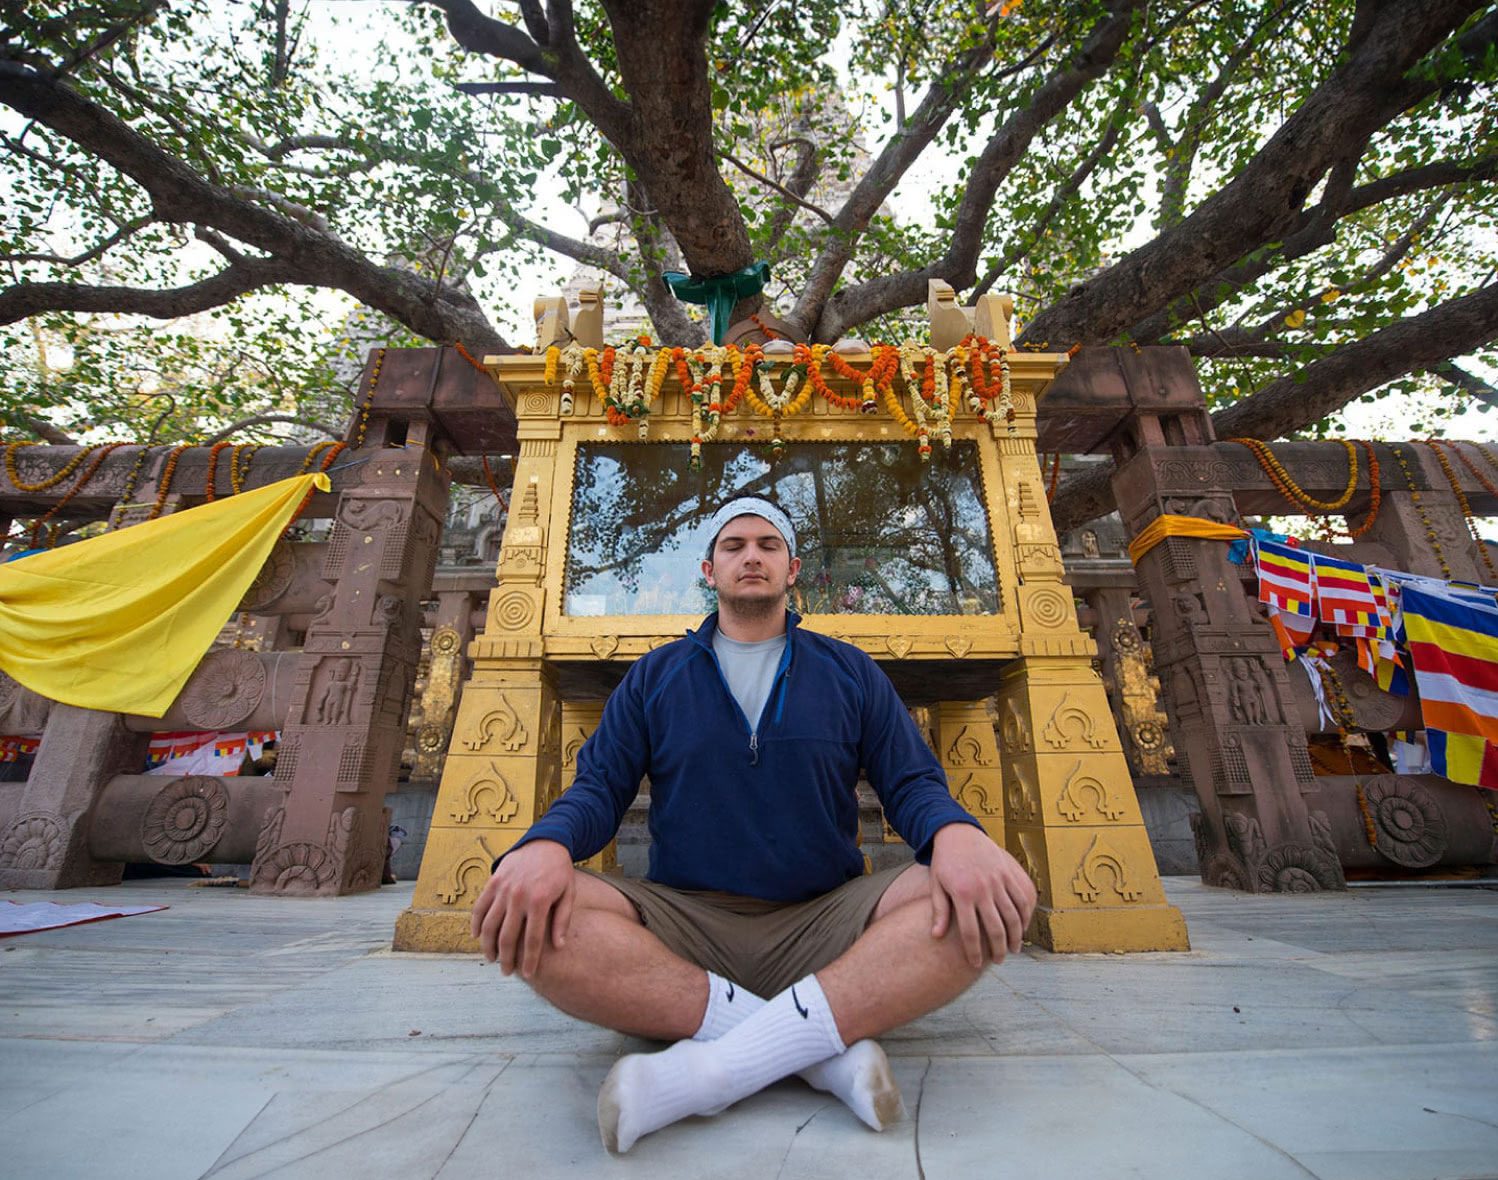 A young man crosses his legs and meditates in a sitting position.